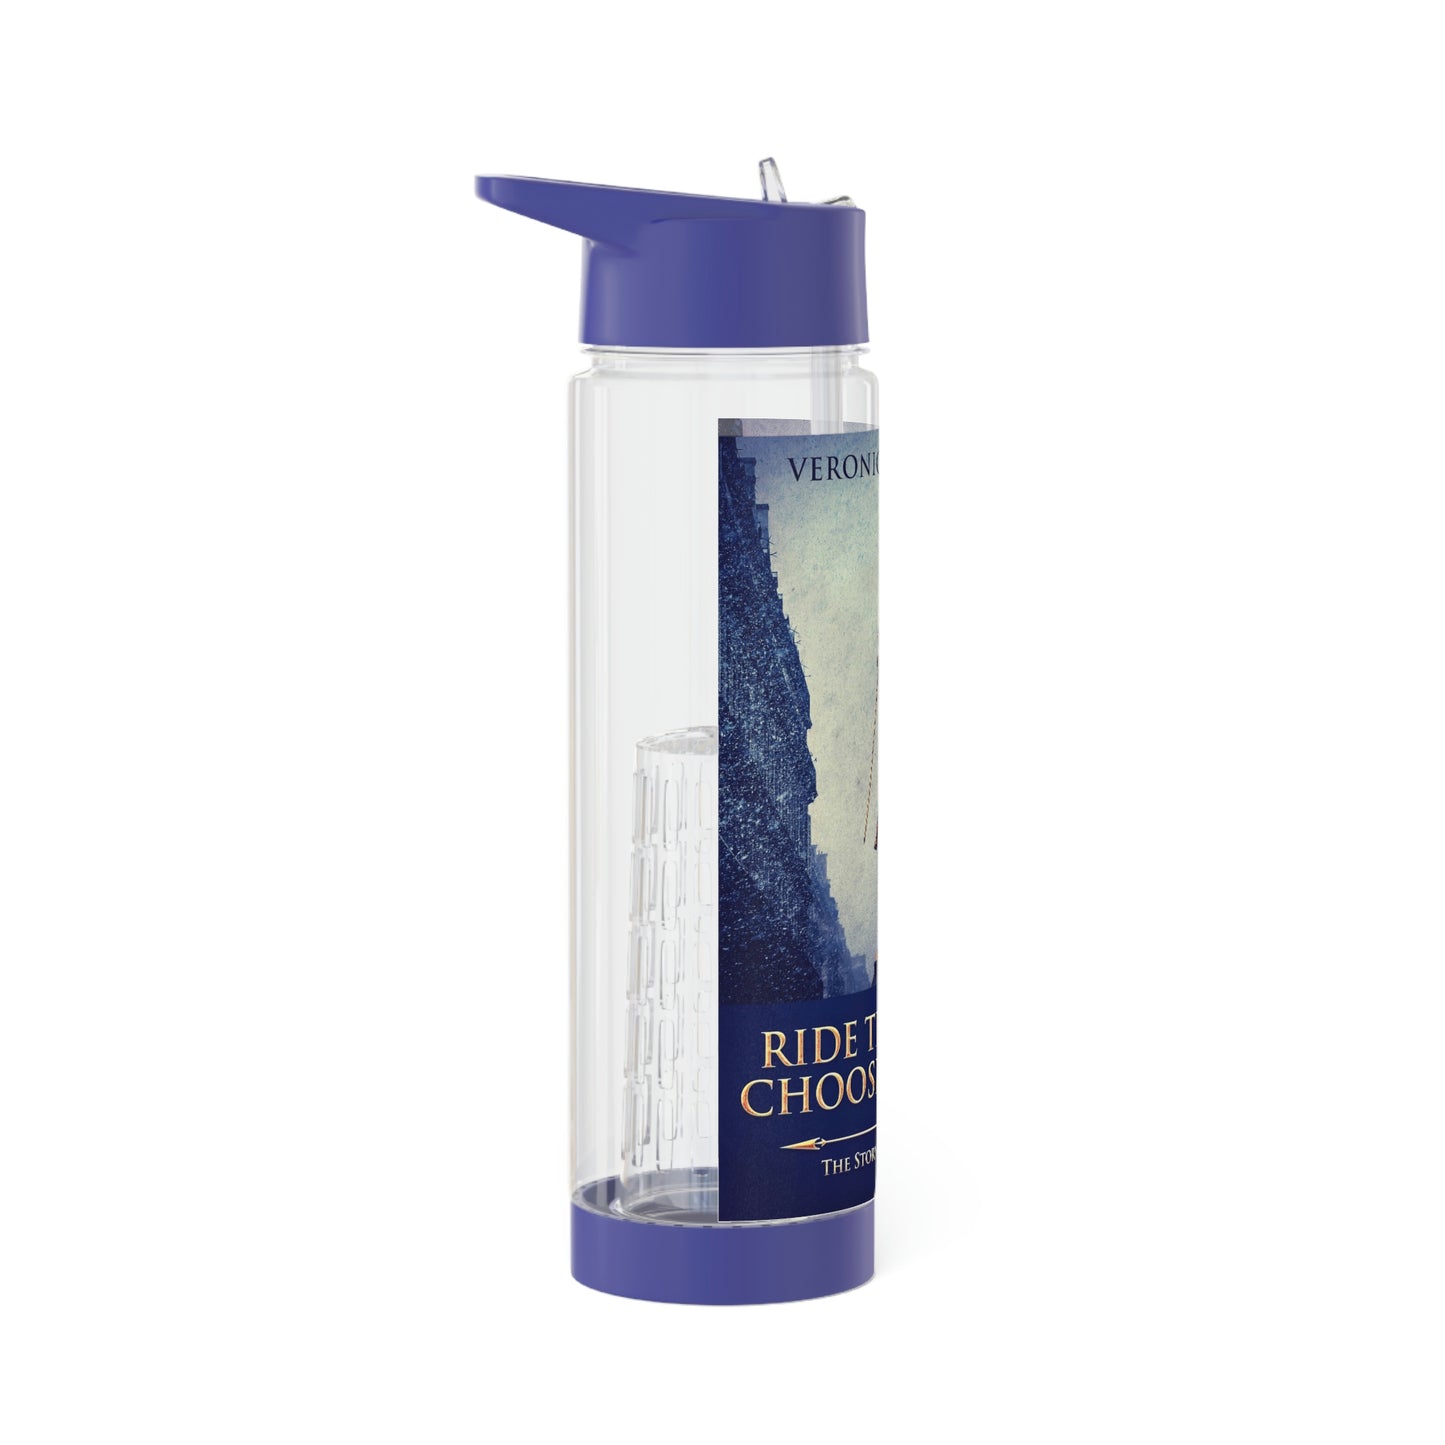 Ride The Wind, Choose The Fire - Infuser Water Bottle